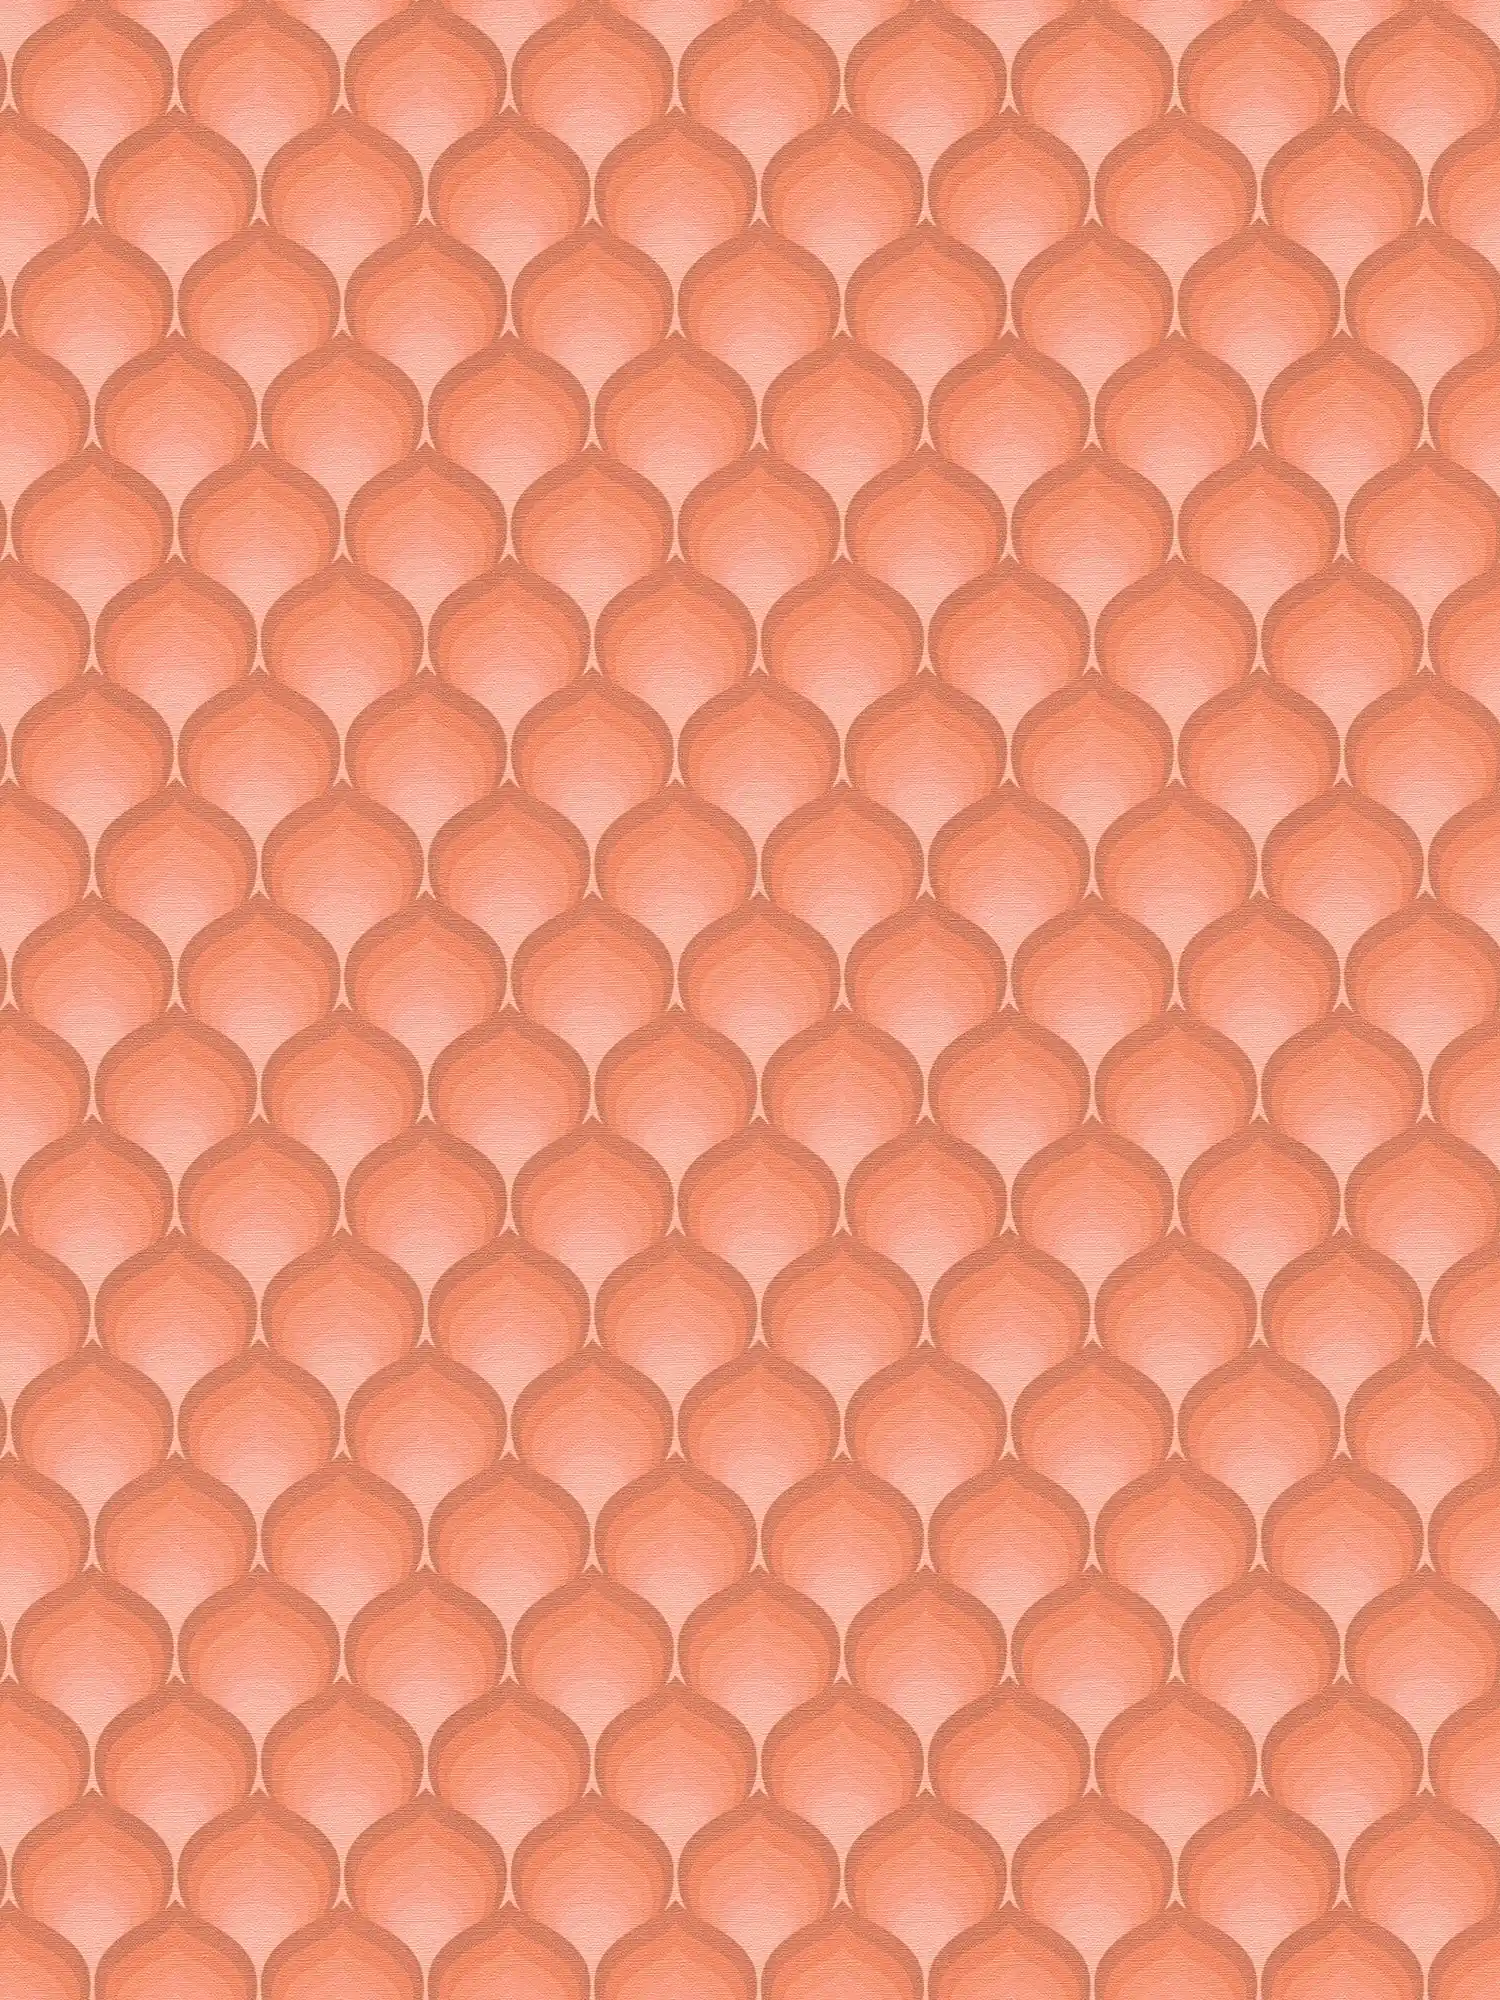 Retro non-woven wallpaper with scale pattern in warm colours - orange, red, pink
